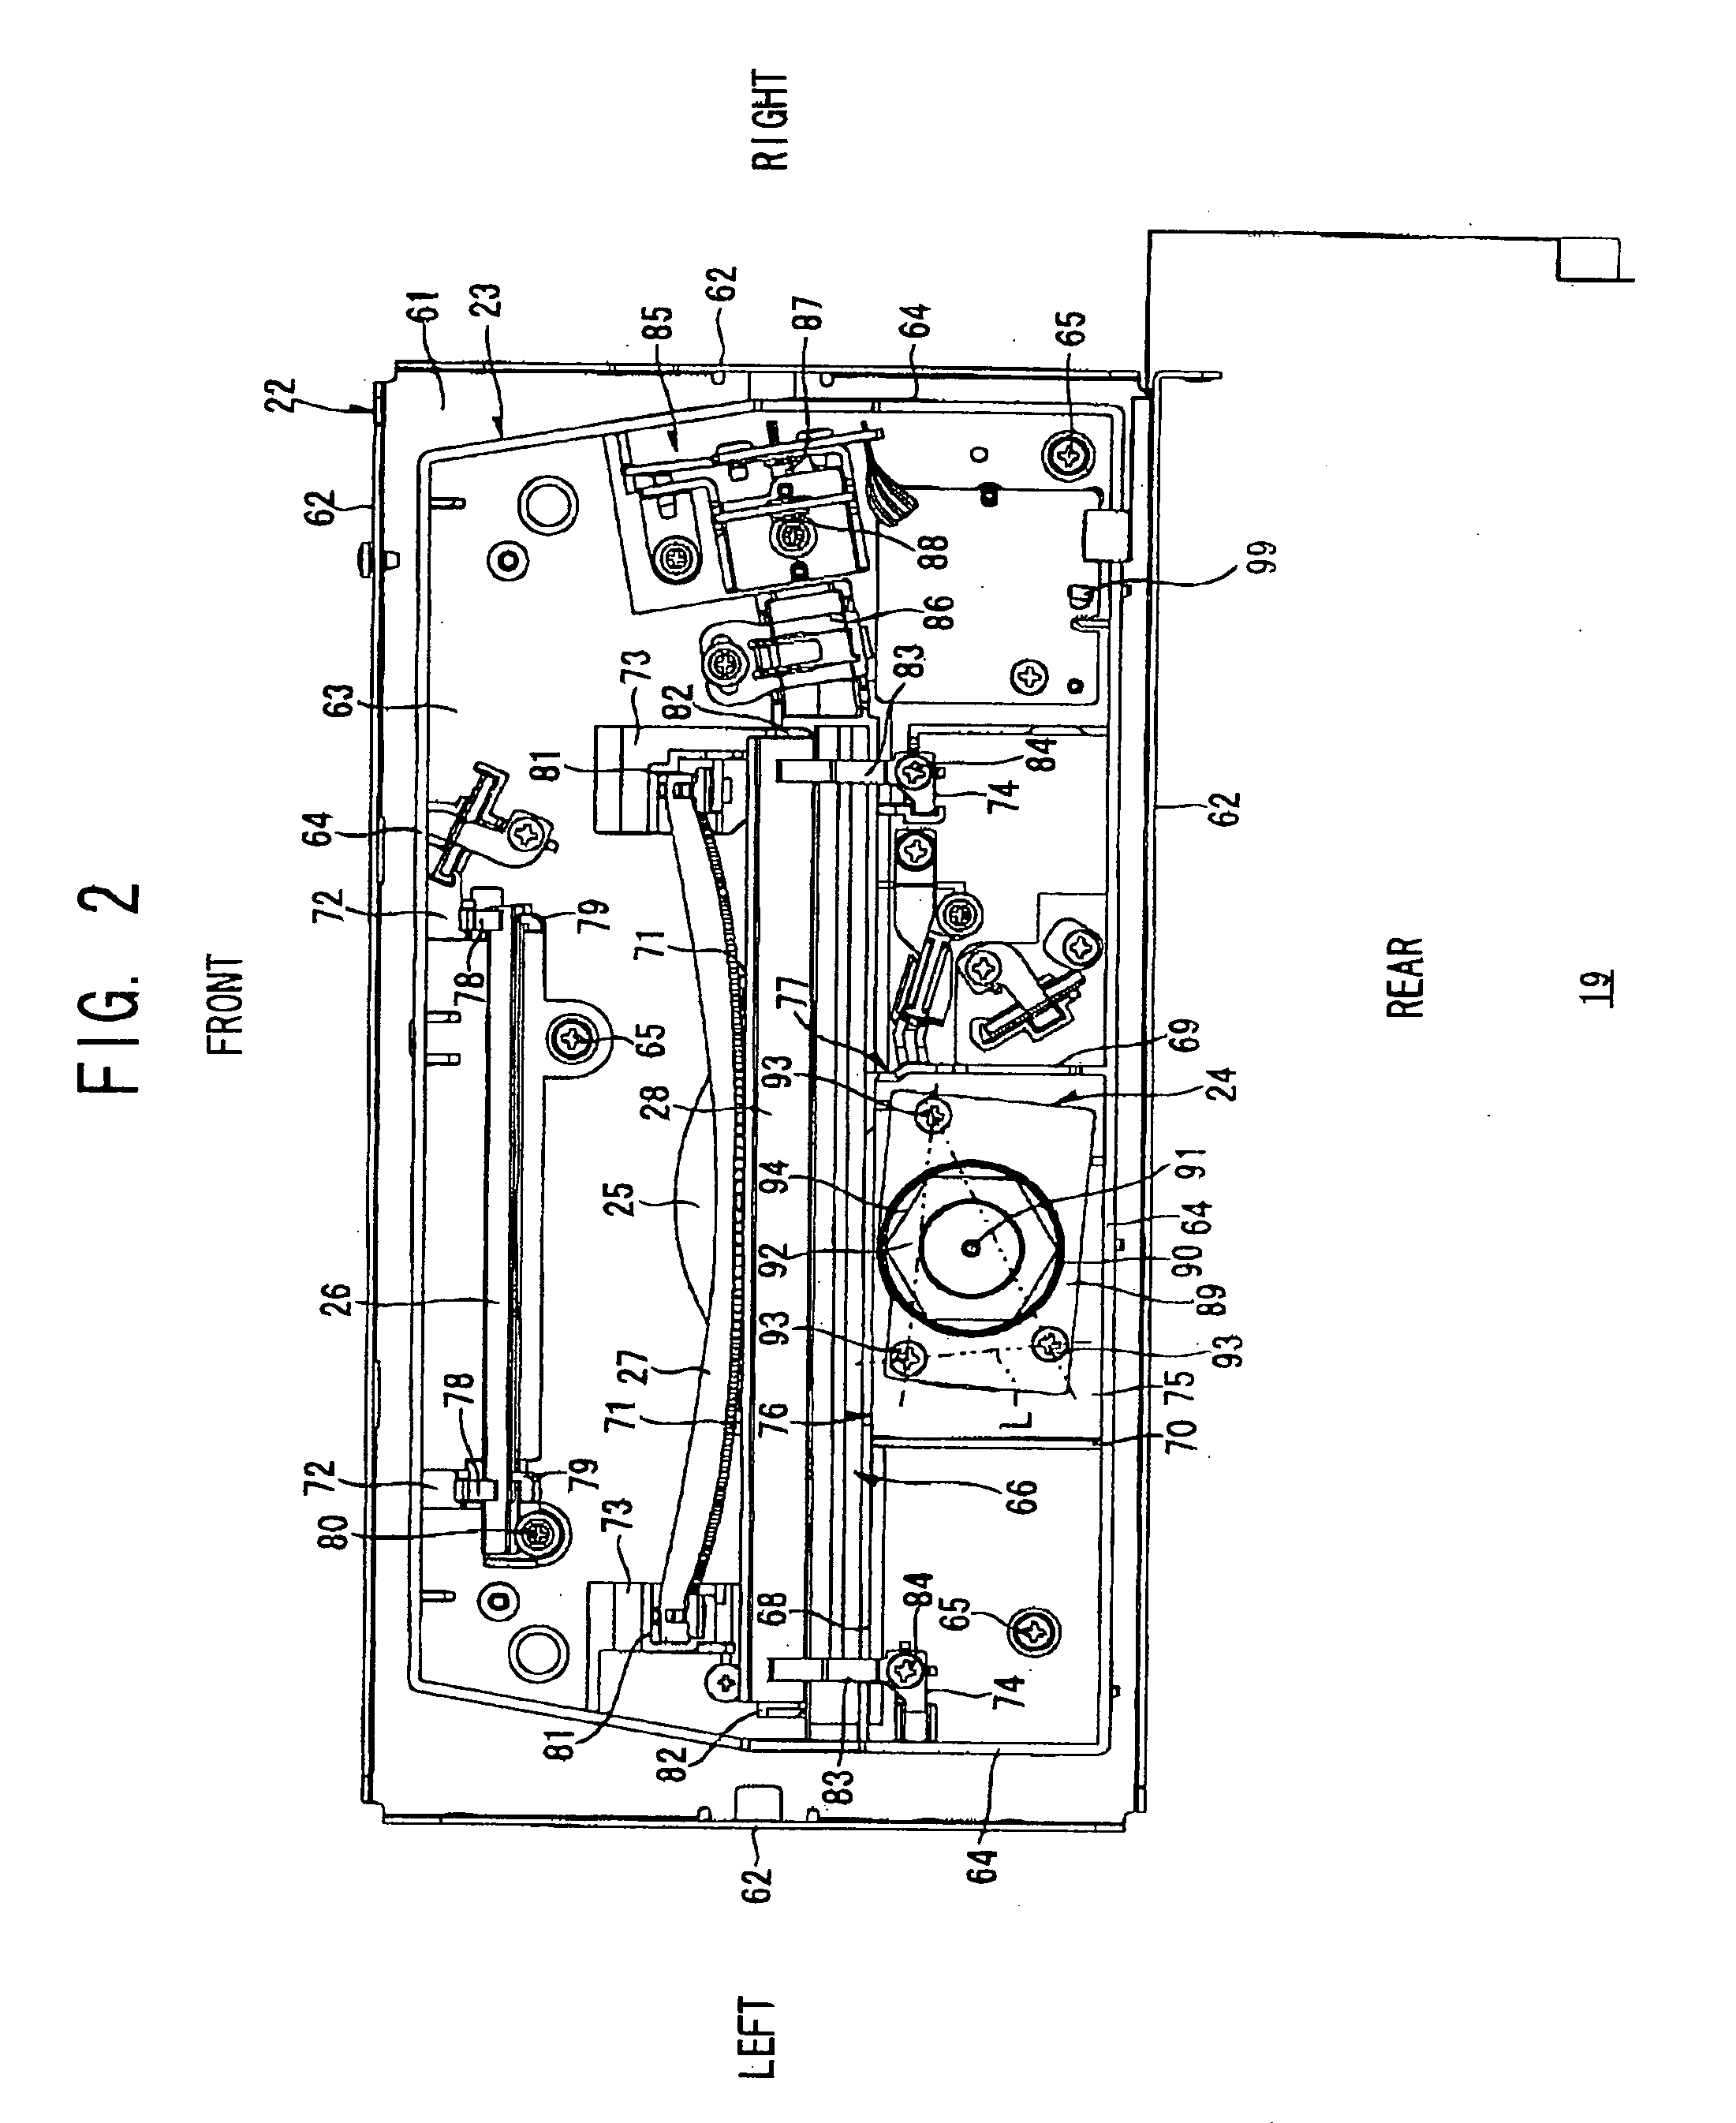 Optical scanner and image-forming device